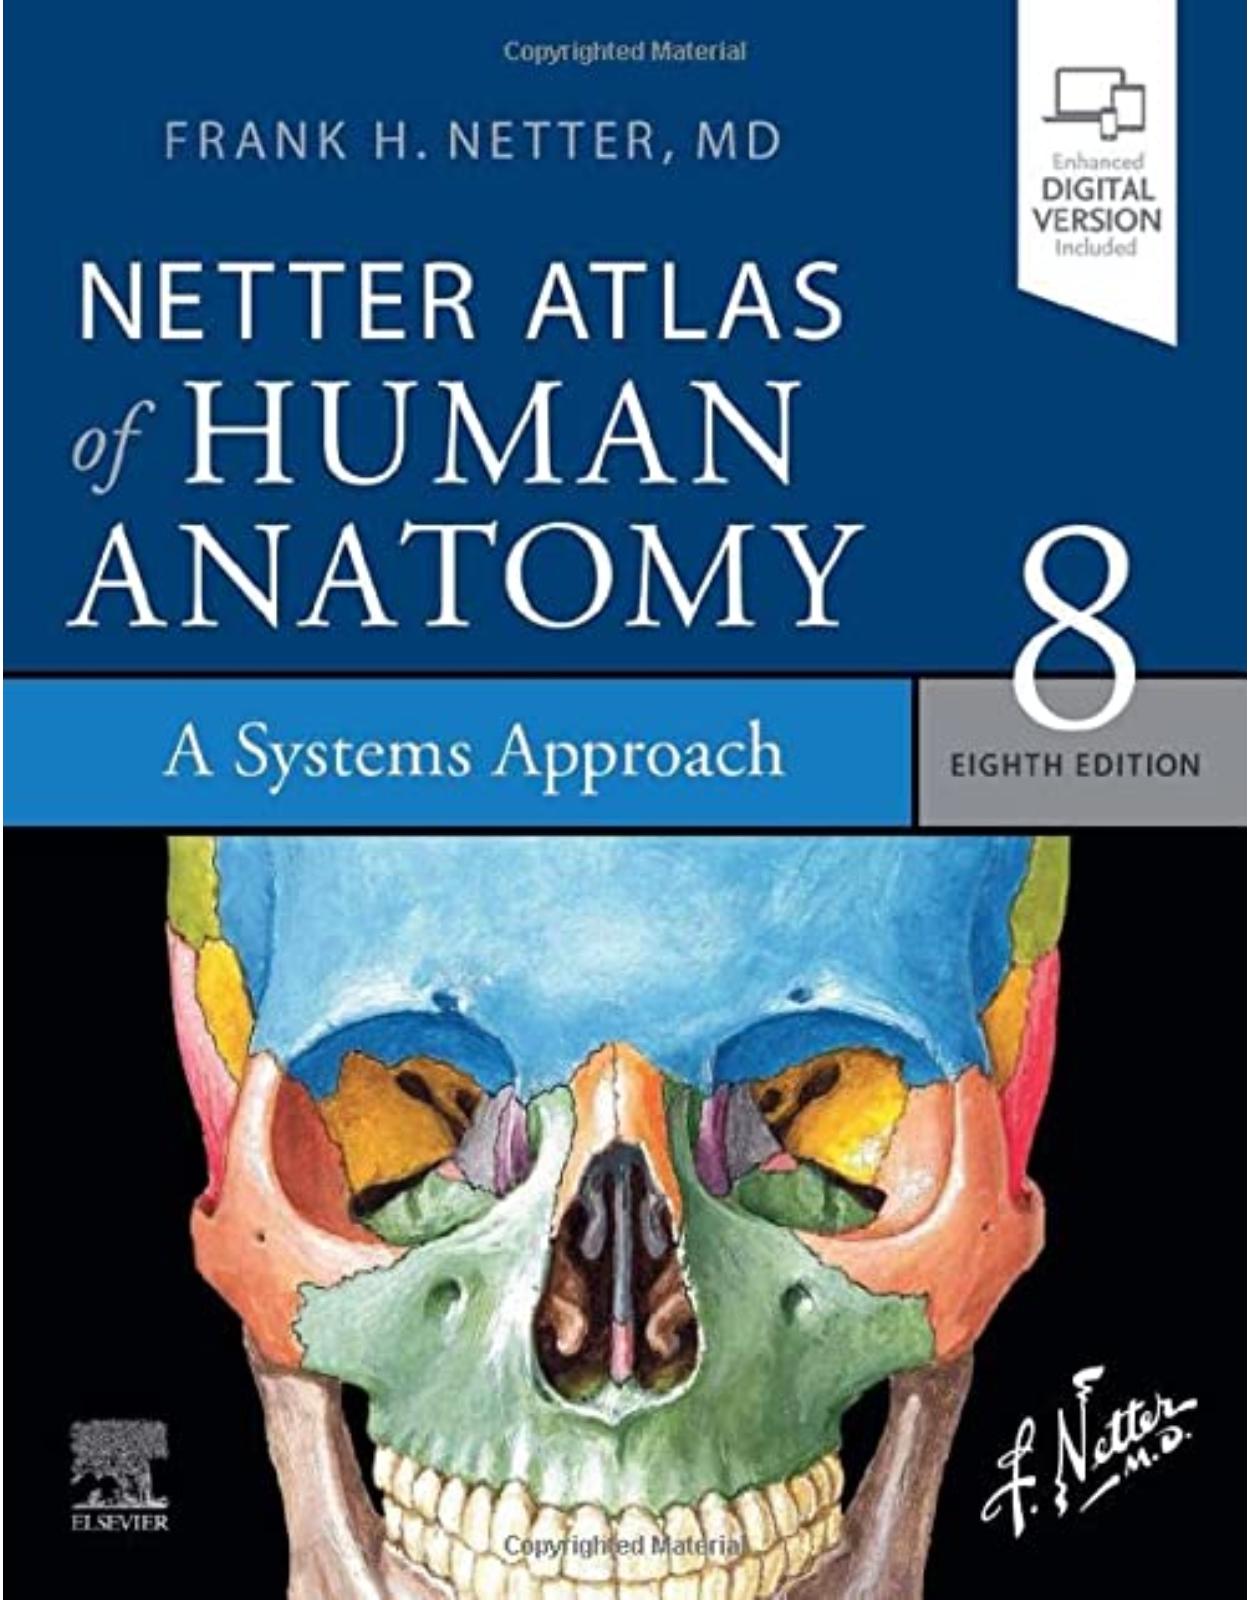 Netter Atlas of Human Anatomy: A Systems Approach: paperback 